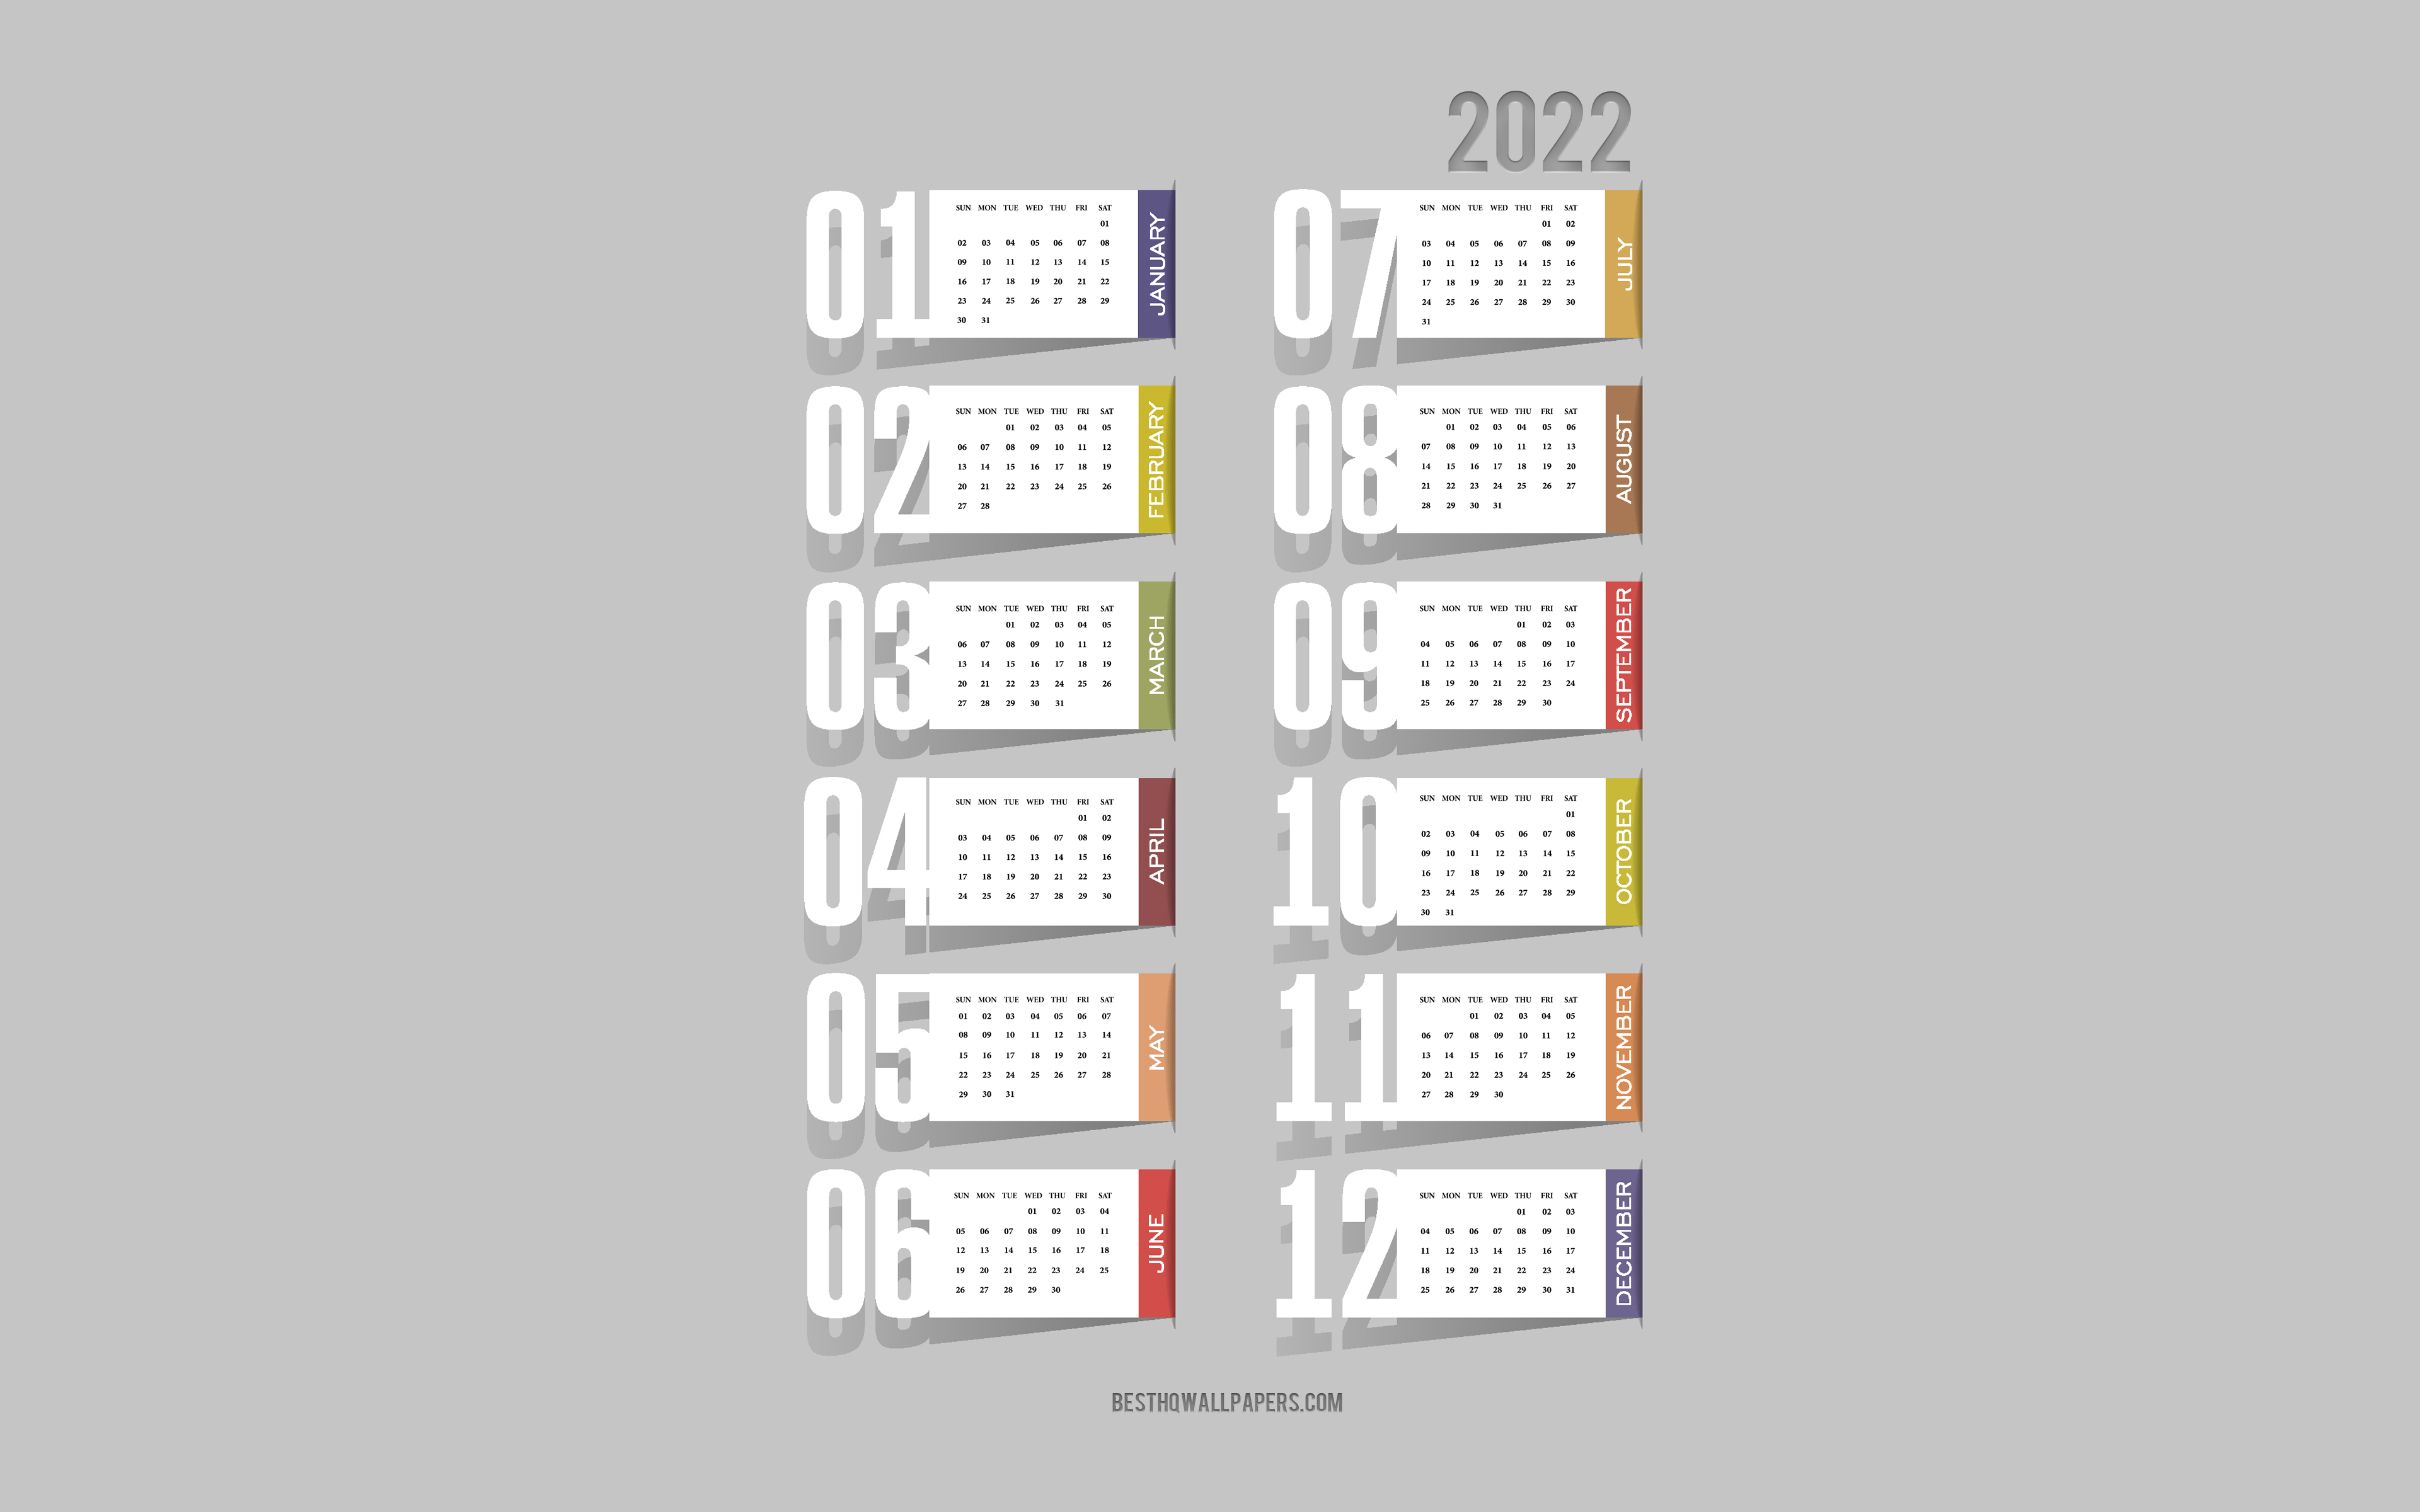 Download wallpaper 2022 Year Calendar, 4k, paper elements, 2022 Calendar, paper art, 2022 all months calendar, gray background for desktop with resolution 3840x2400. High Quality HD picture wallpaper